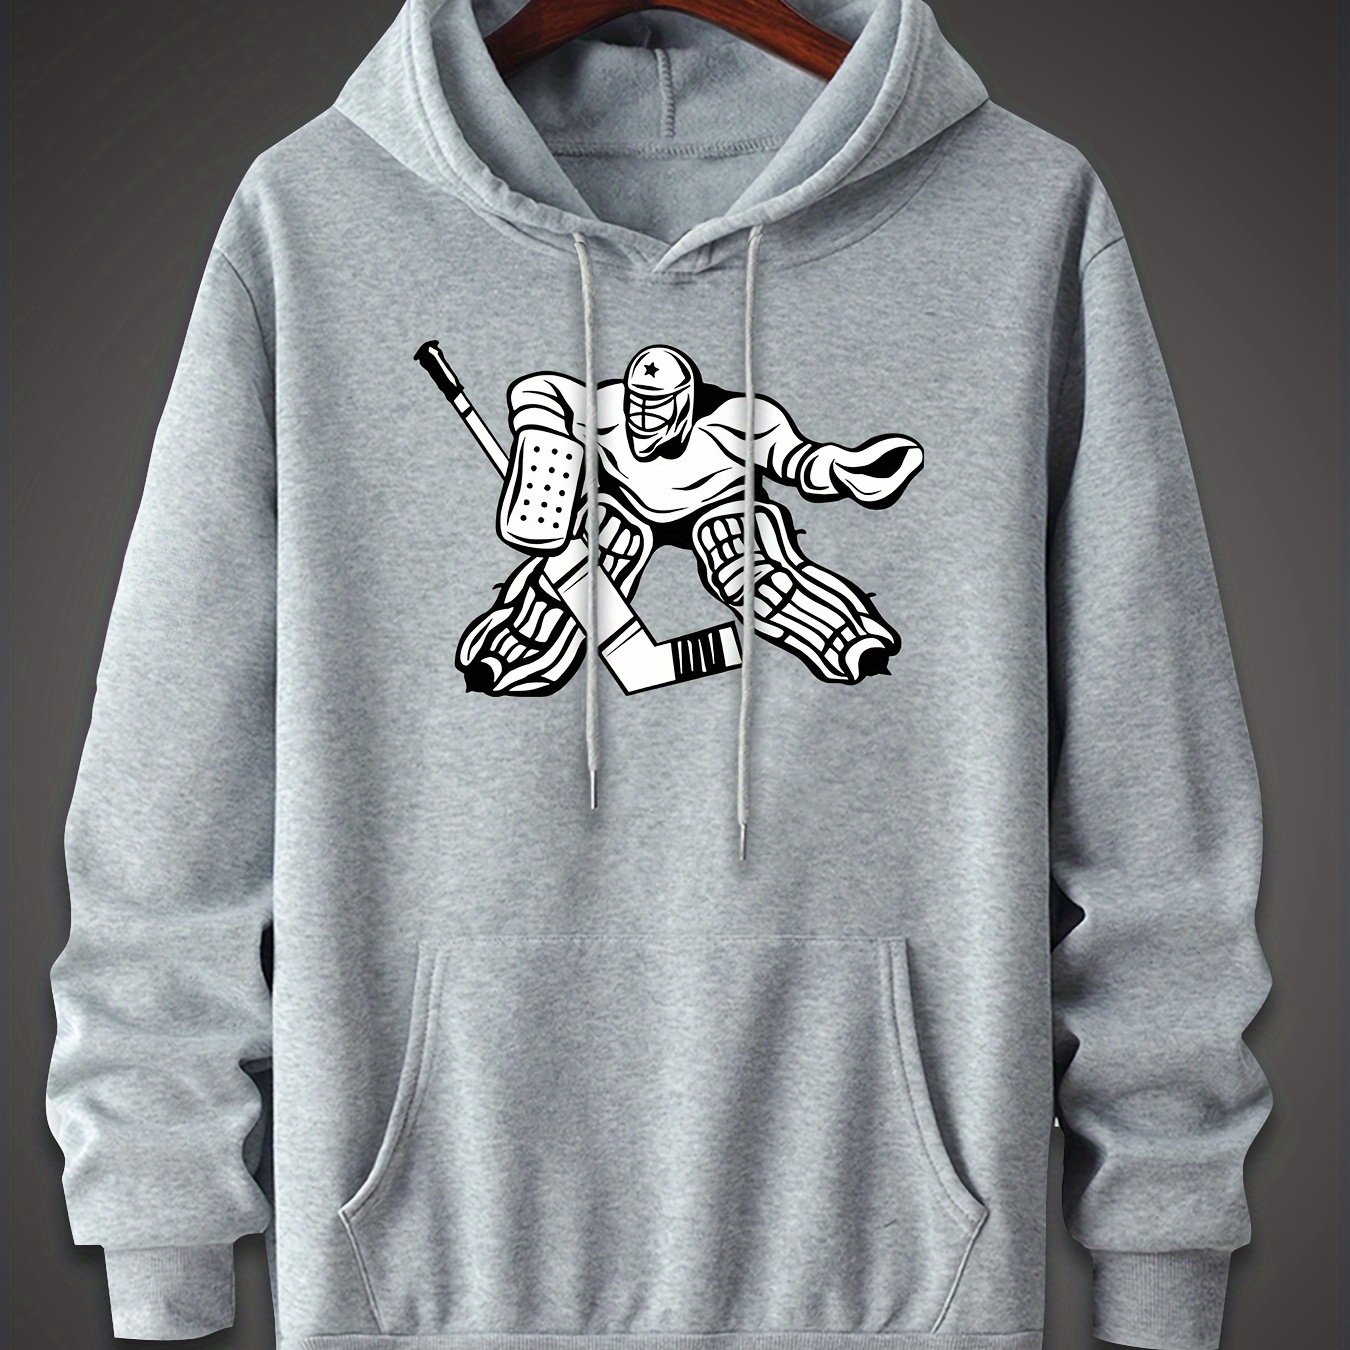 

Hockey Player Pattern, Men's Trendy Comfy Hoodie, Casual Slightly Stretch Breathable Hooded Sweatshirt For Outdoor